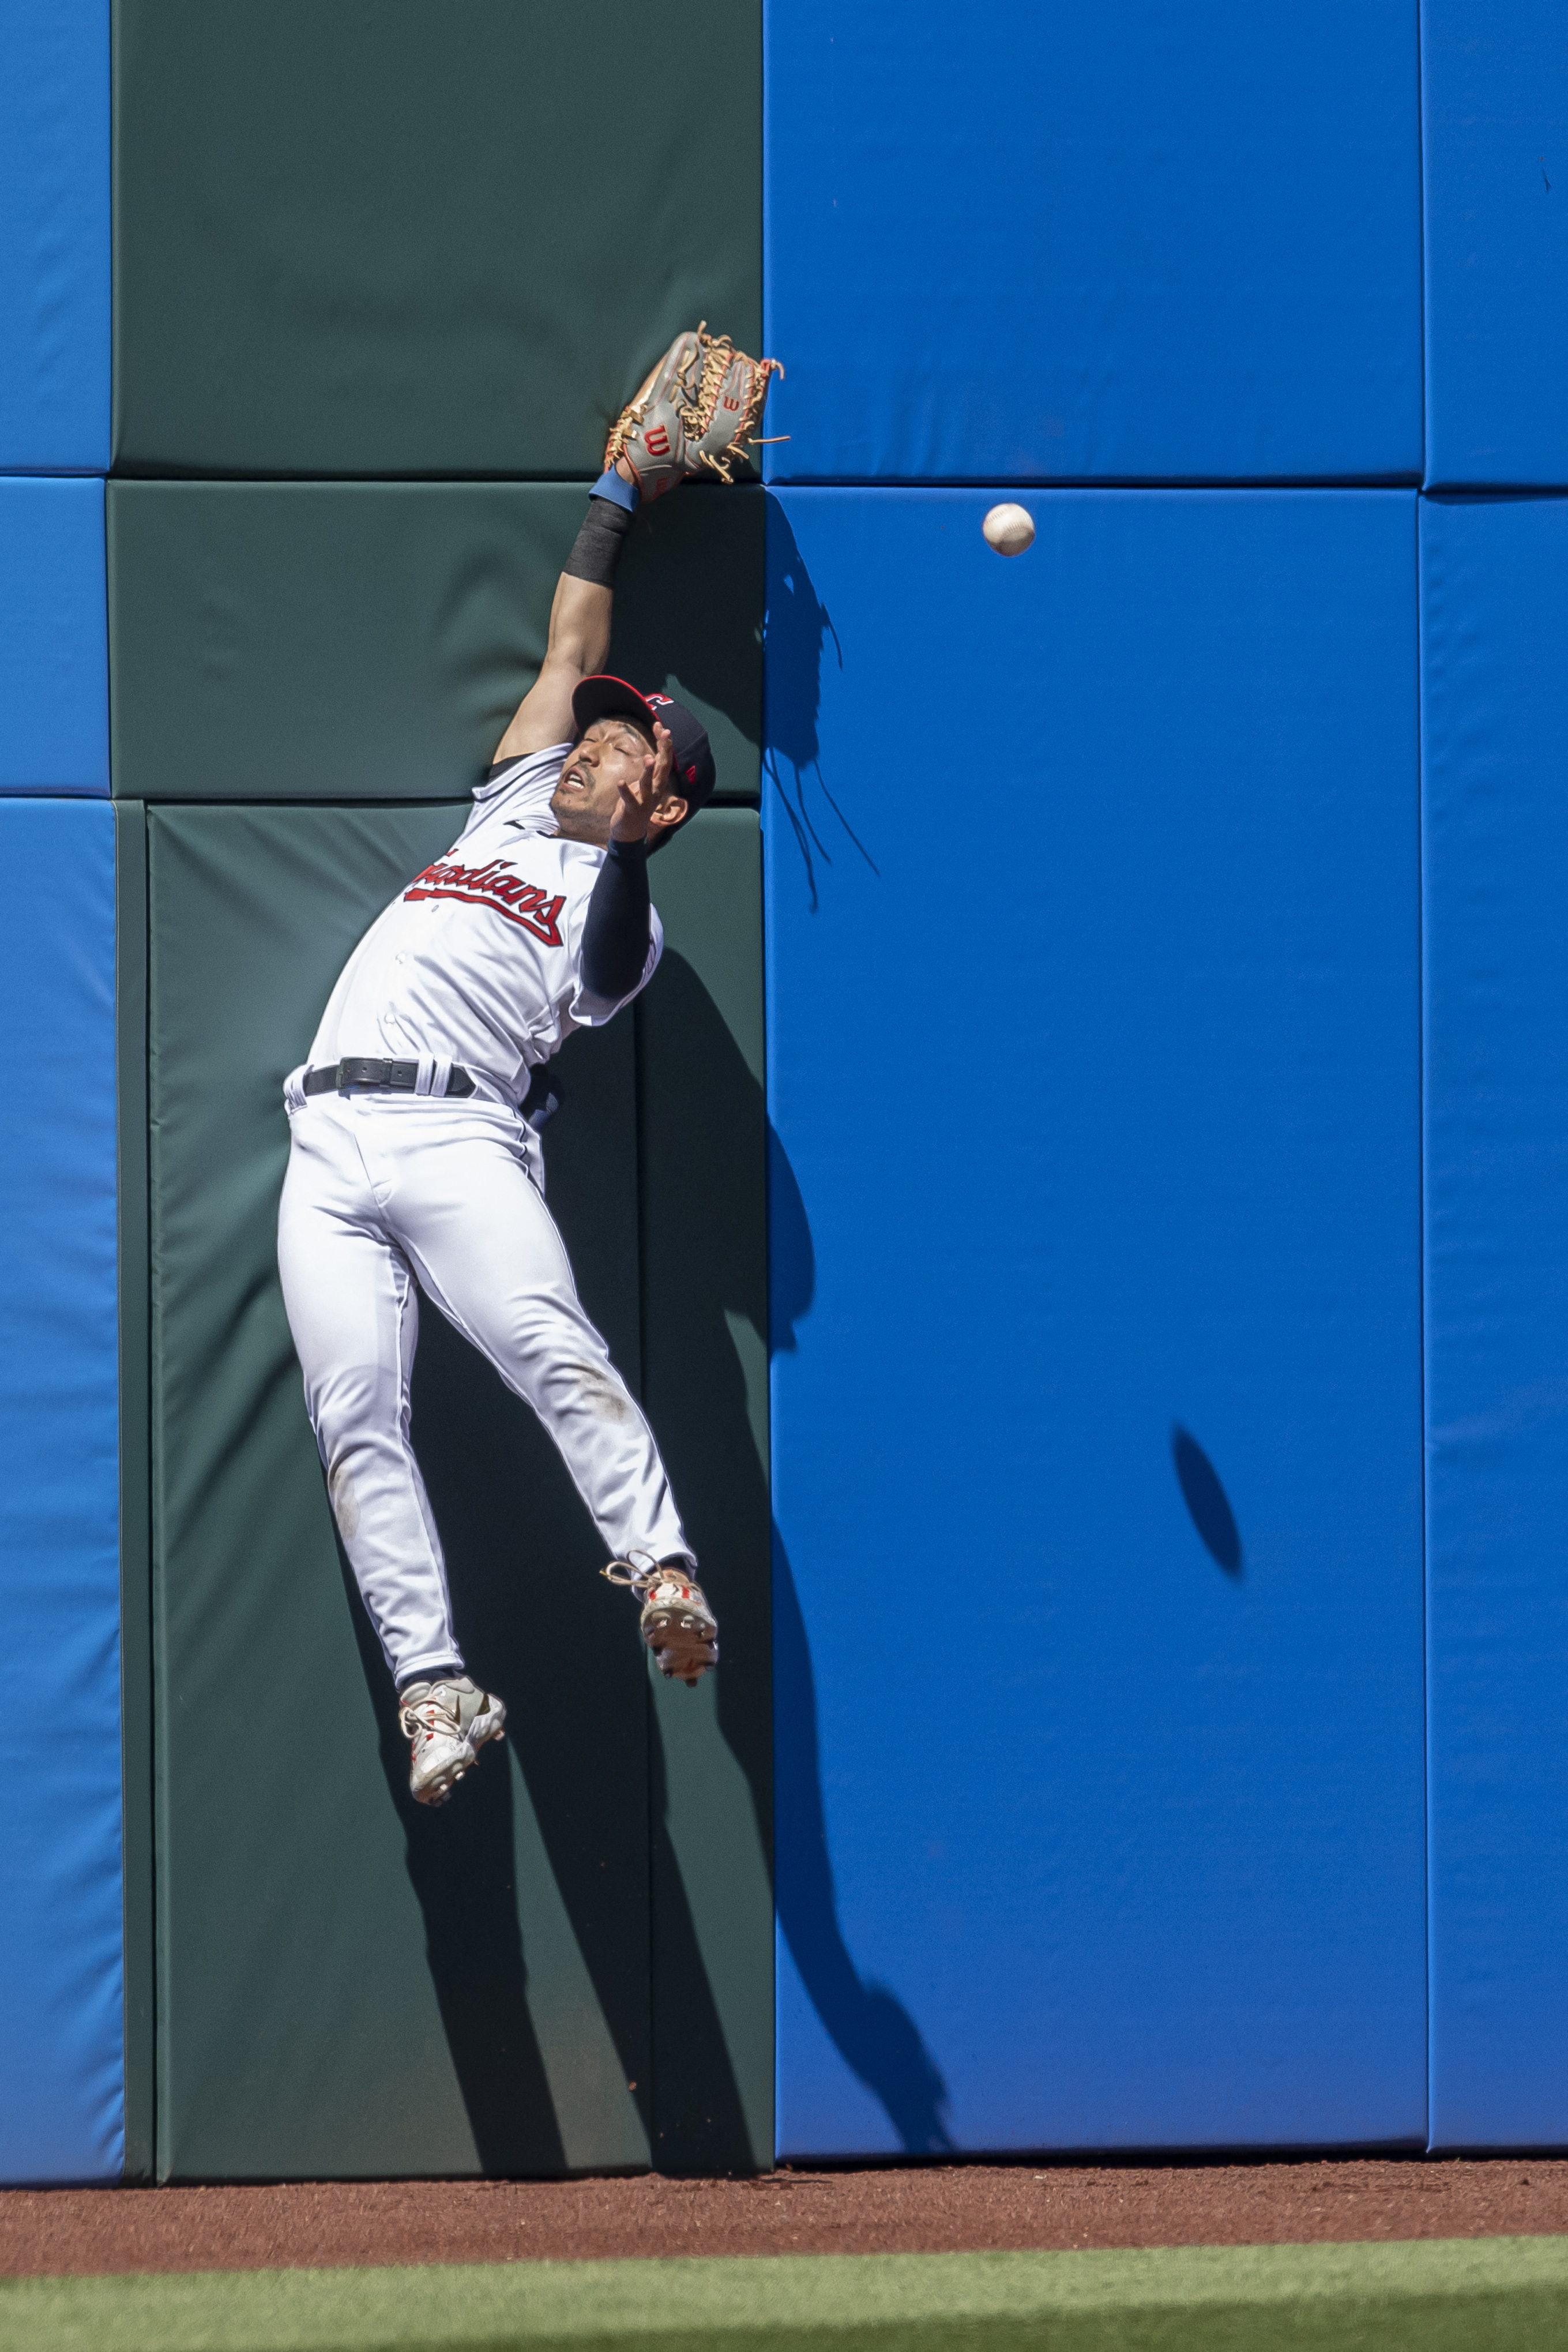 Oswaldo Cabrera of the New York Yankees makes a catch in right field  News Photo - Getty Images